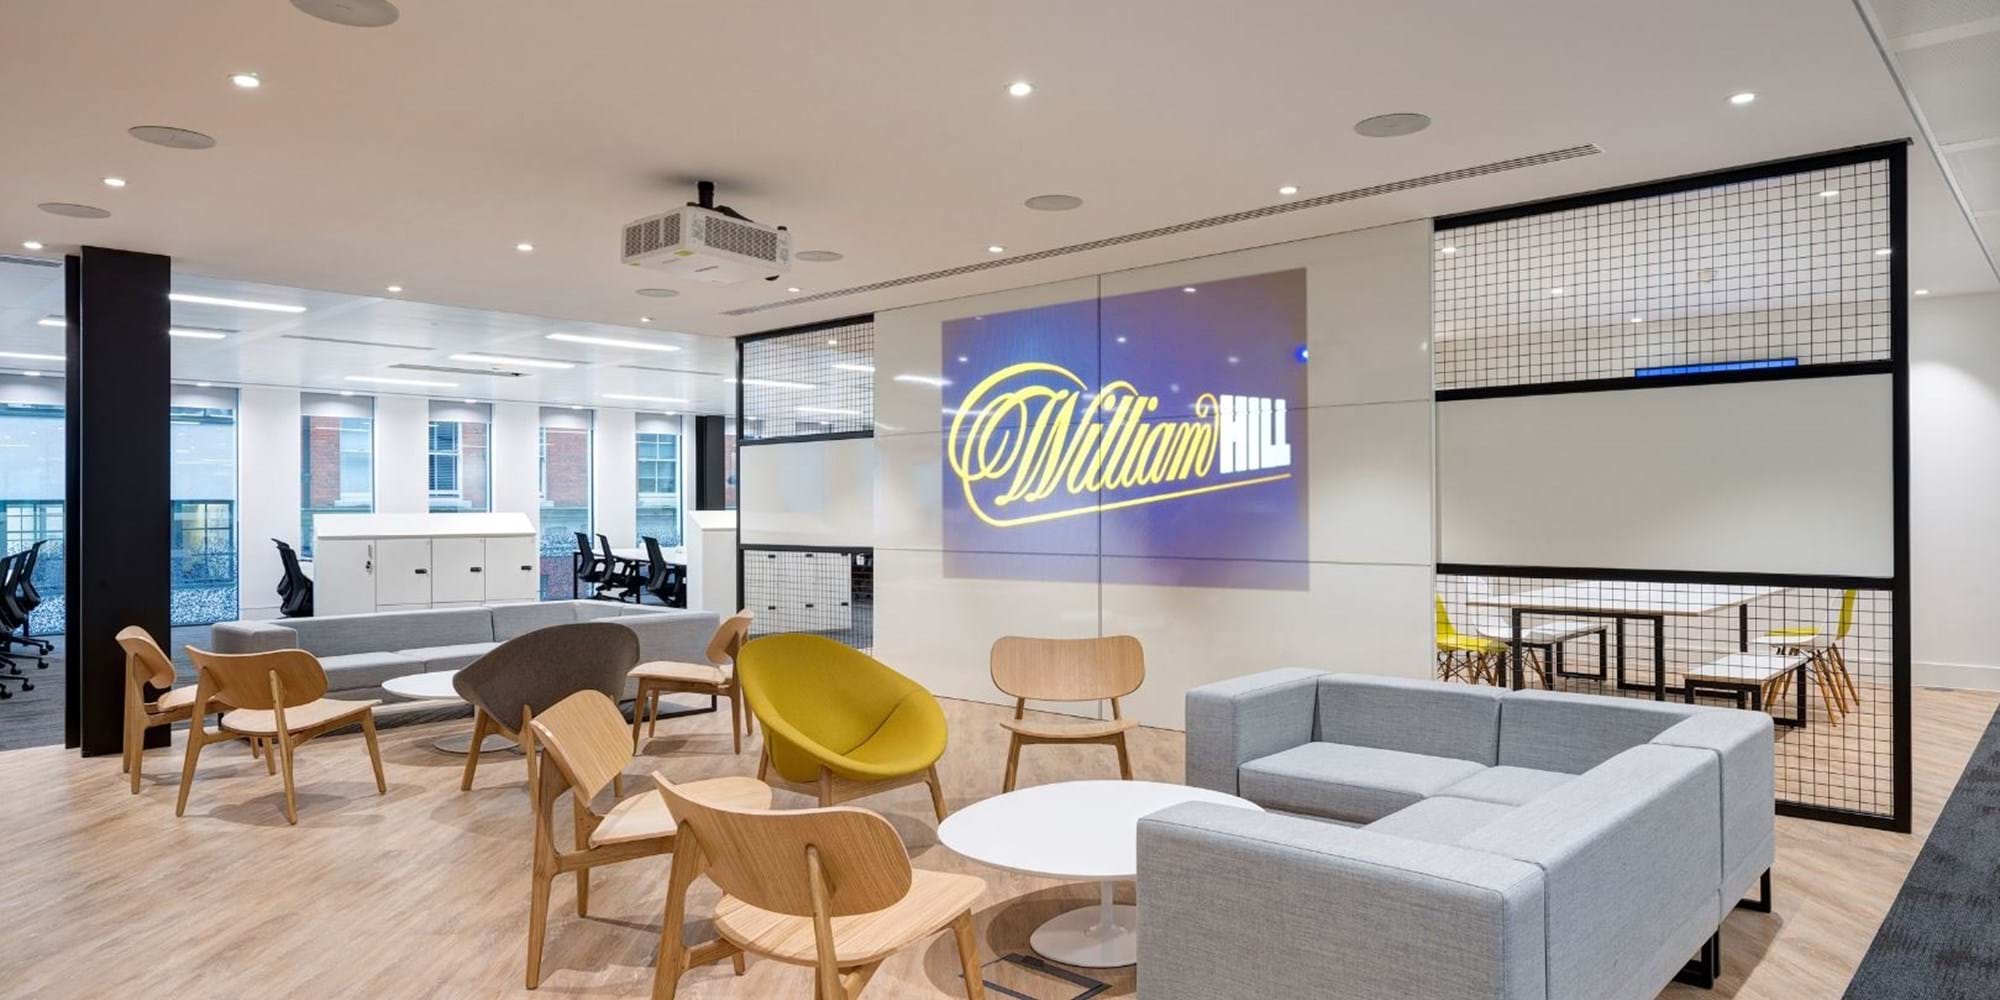 Modus Workspace office design, fit out and refurbishment - William Hill - William Hill 09 B highres sRGB.jpg